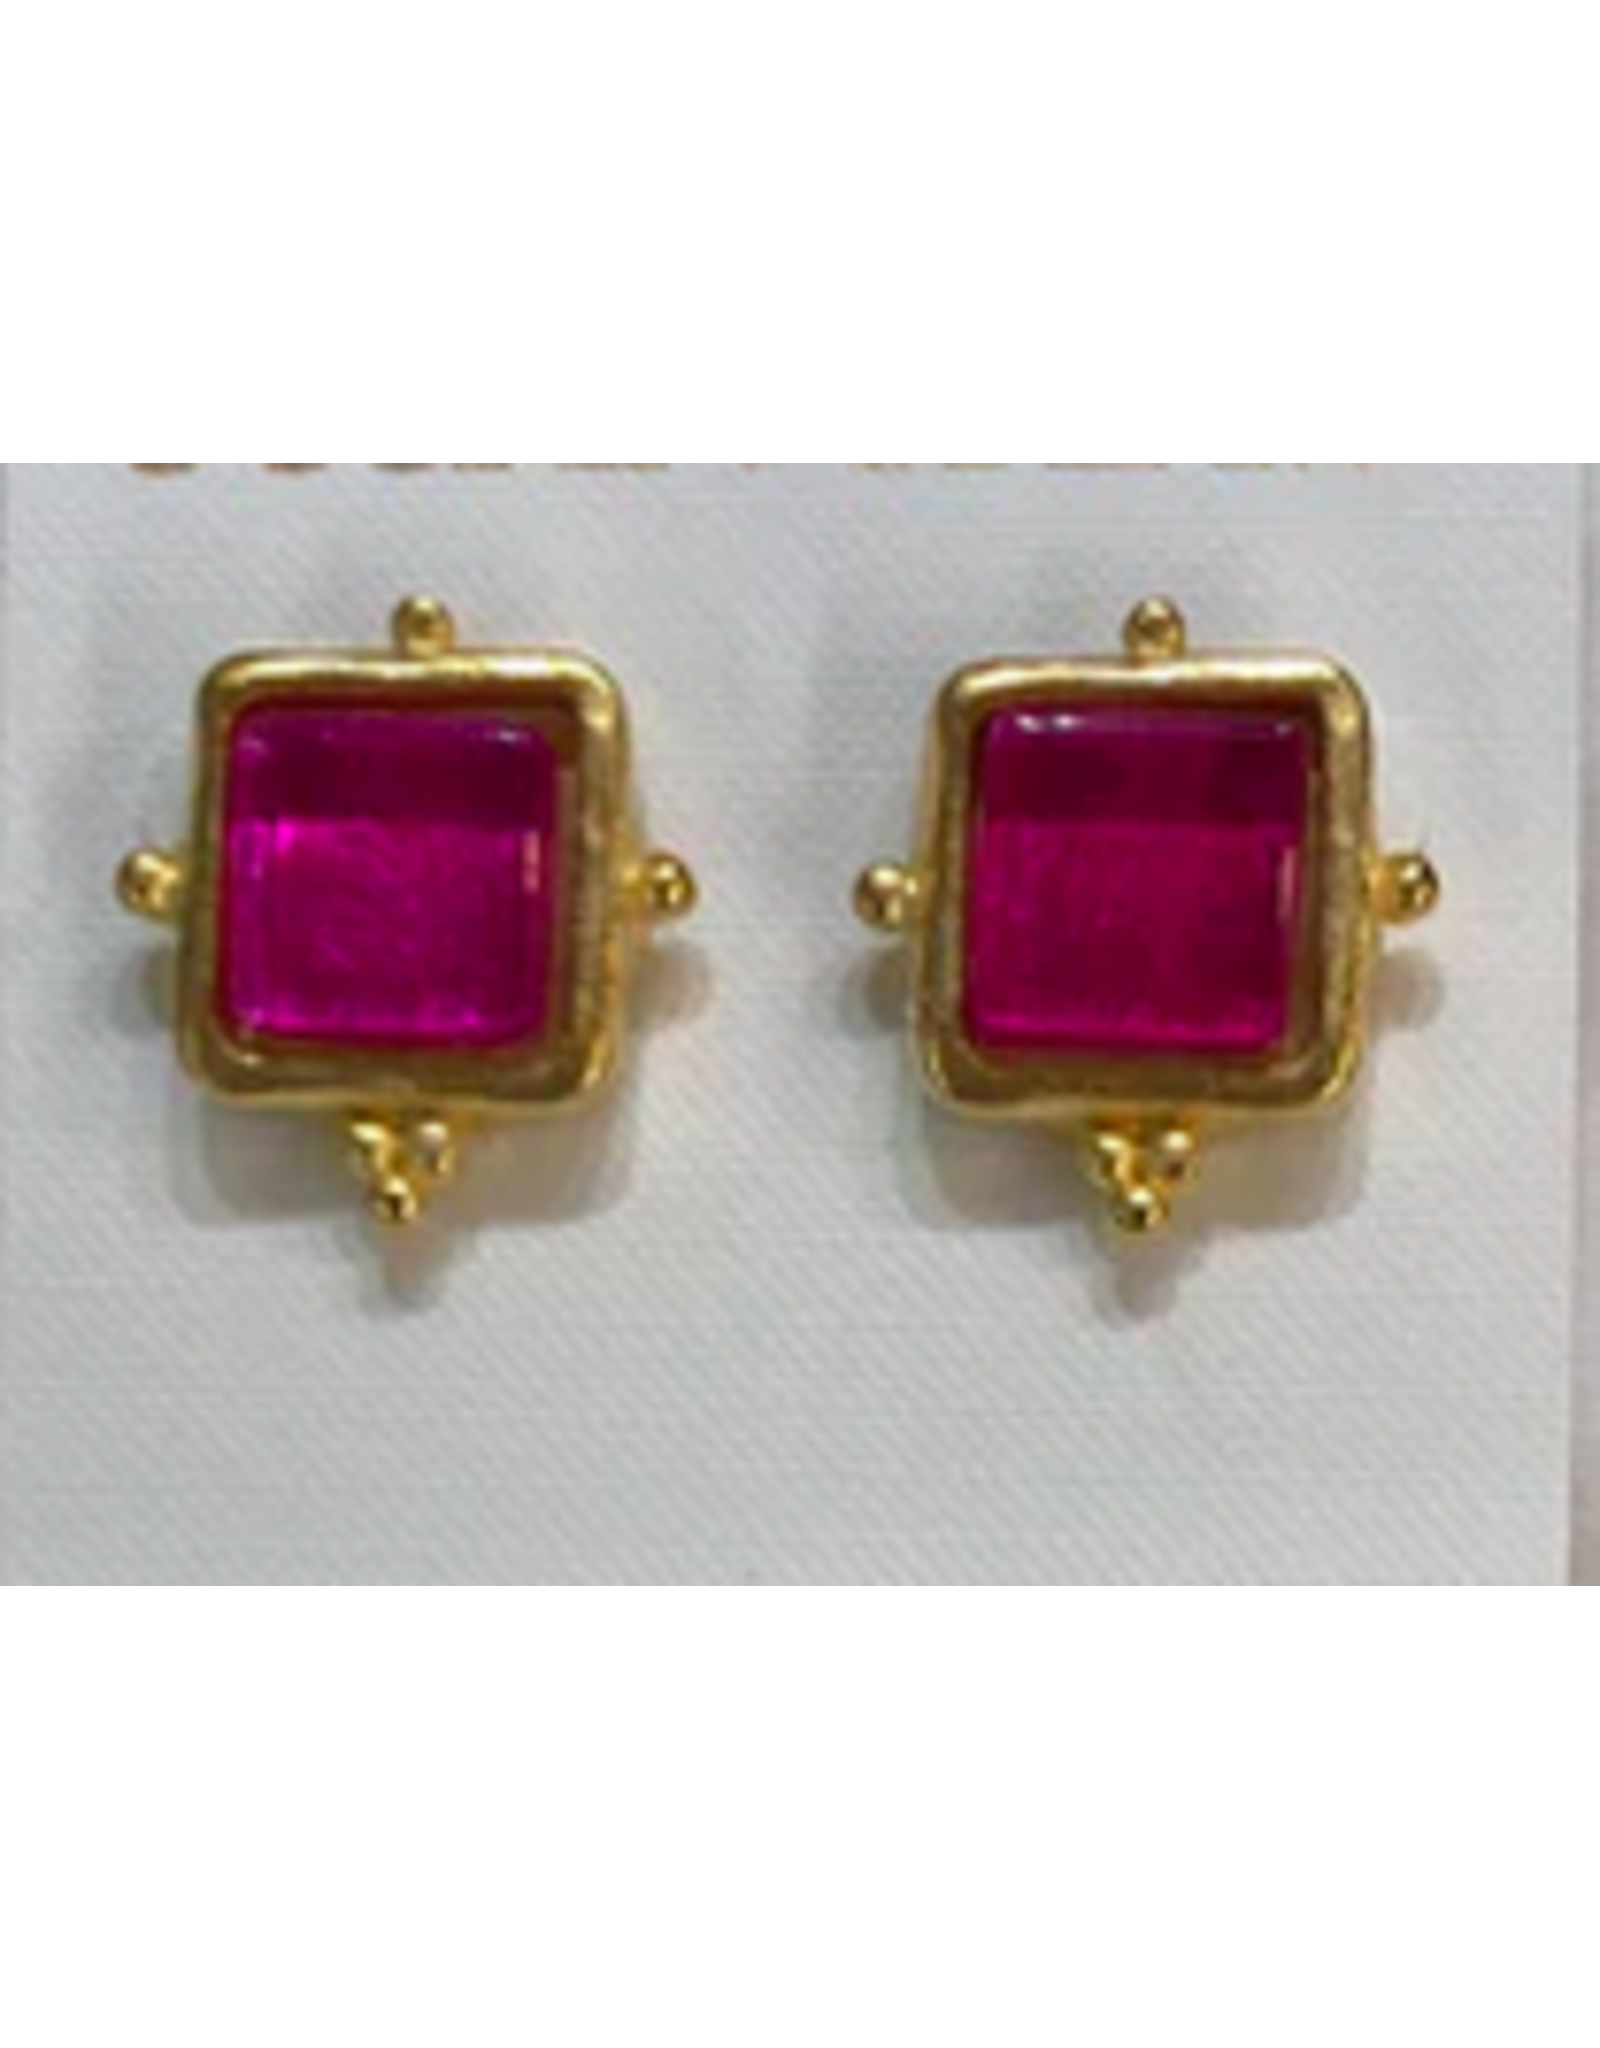 Susan Shaw Madeline French Glass Stud Earrings Fuscia by Susan Shaw